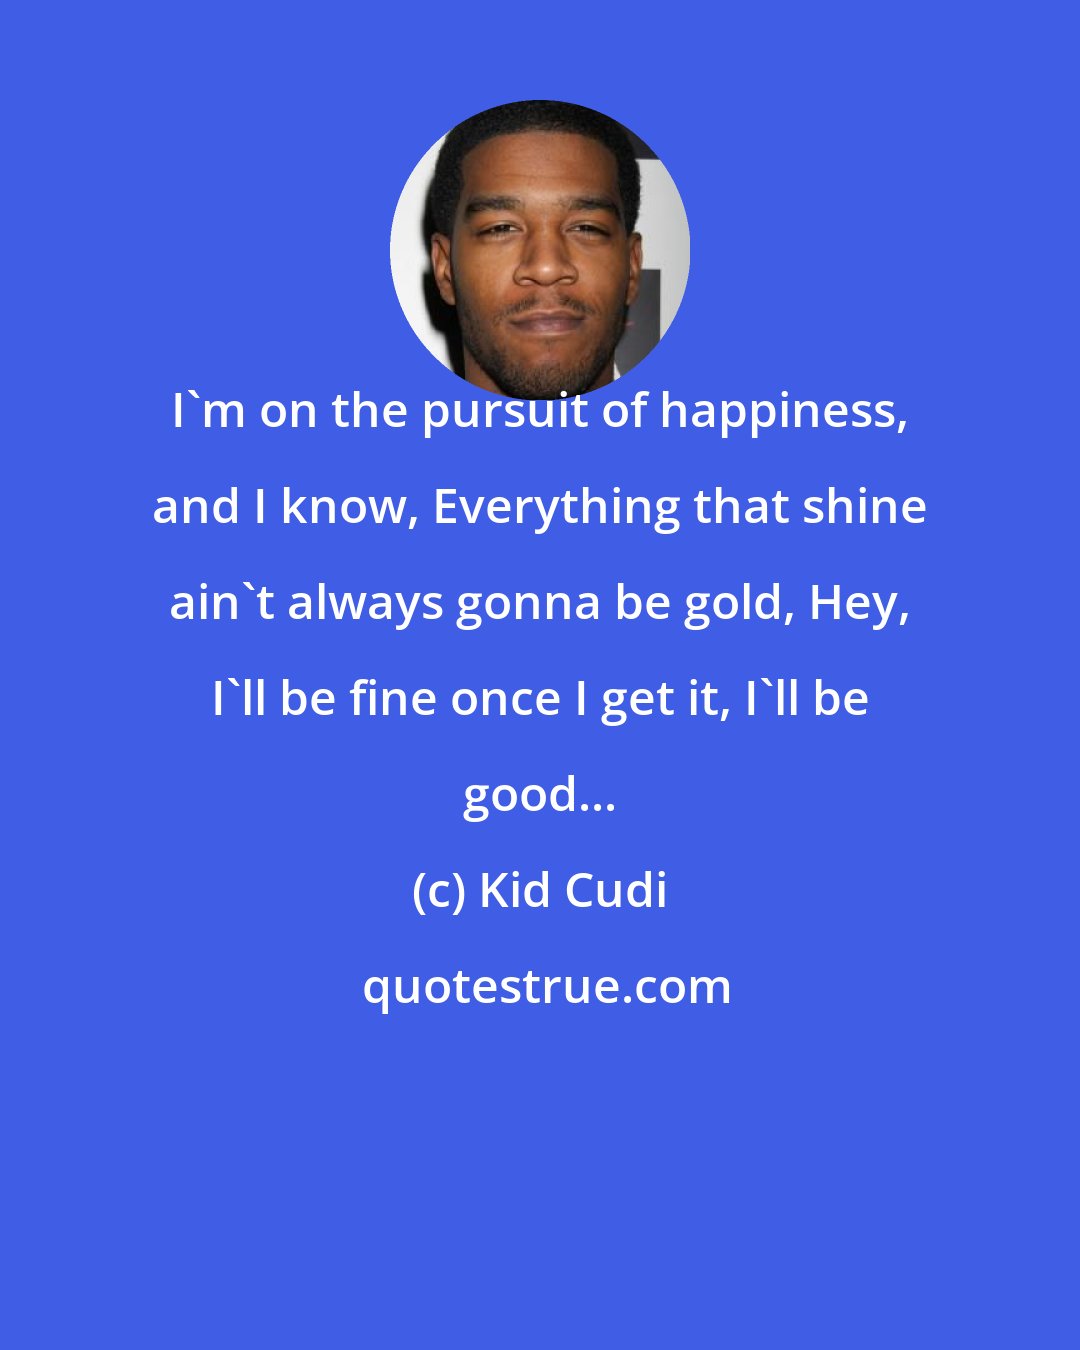 Kid Cudi: I'm on the pursuit of happiness, and I know, Everything that shine ain't always gonna be gold, Hey, I'll be fine once I get it, I'll be good...